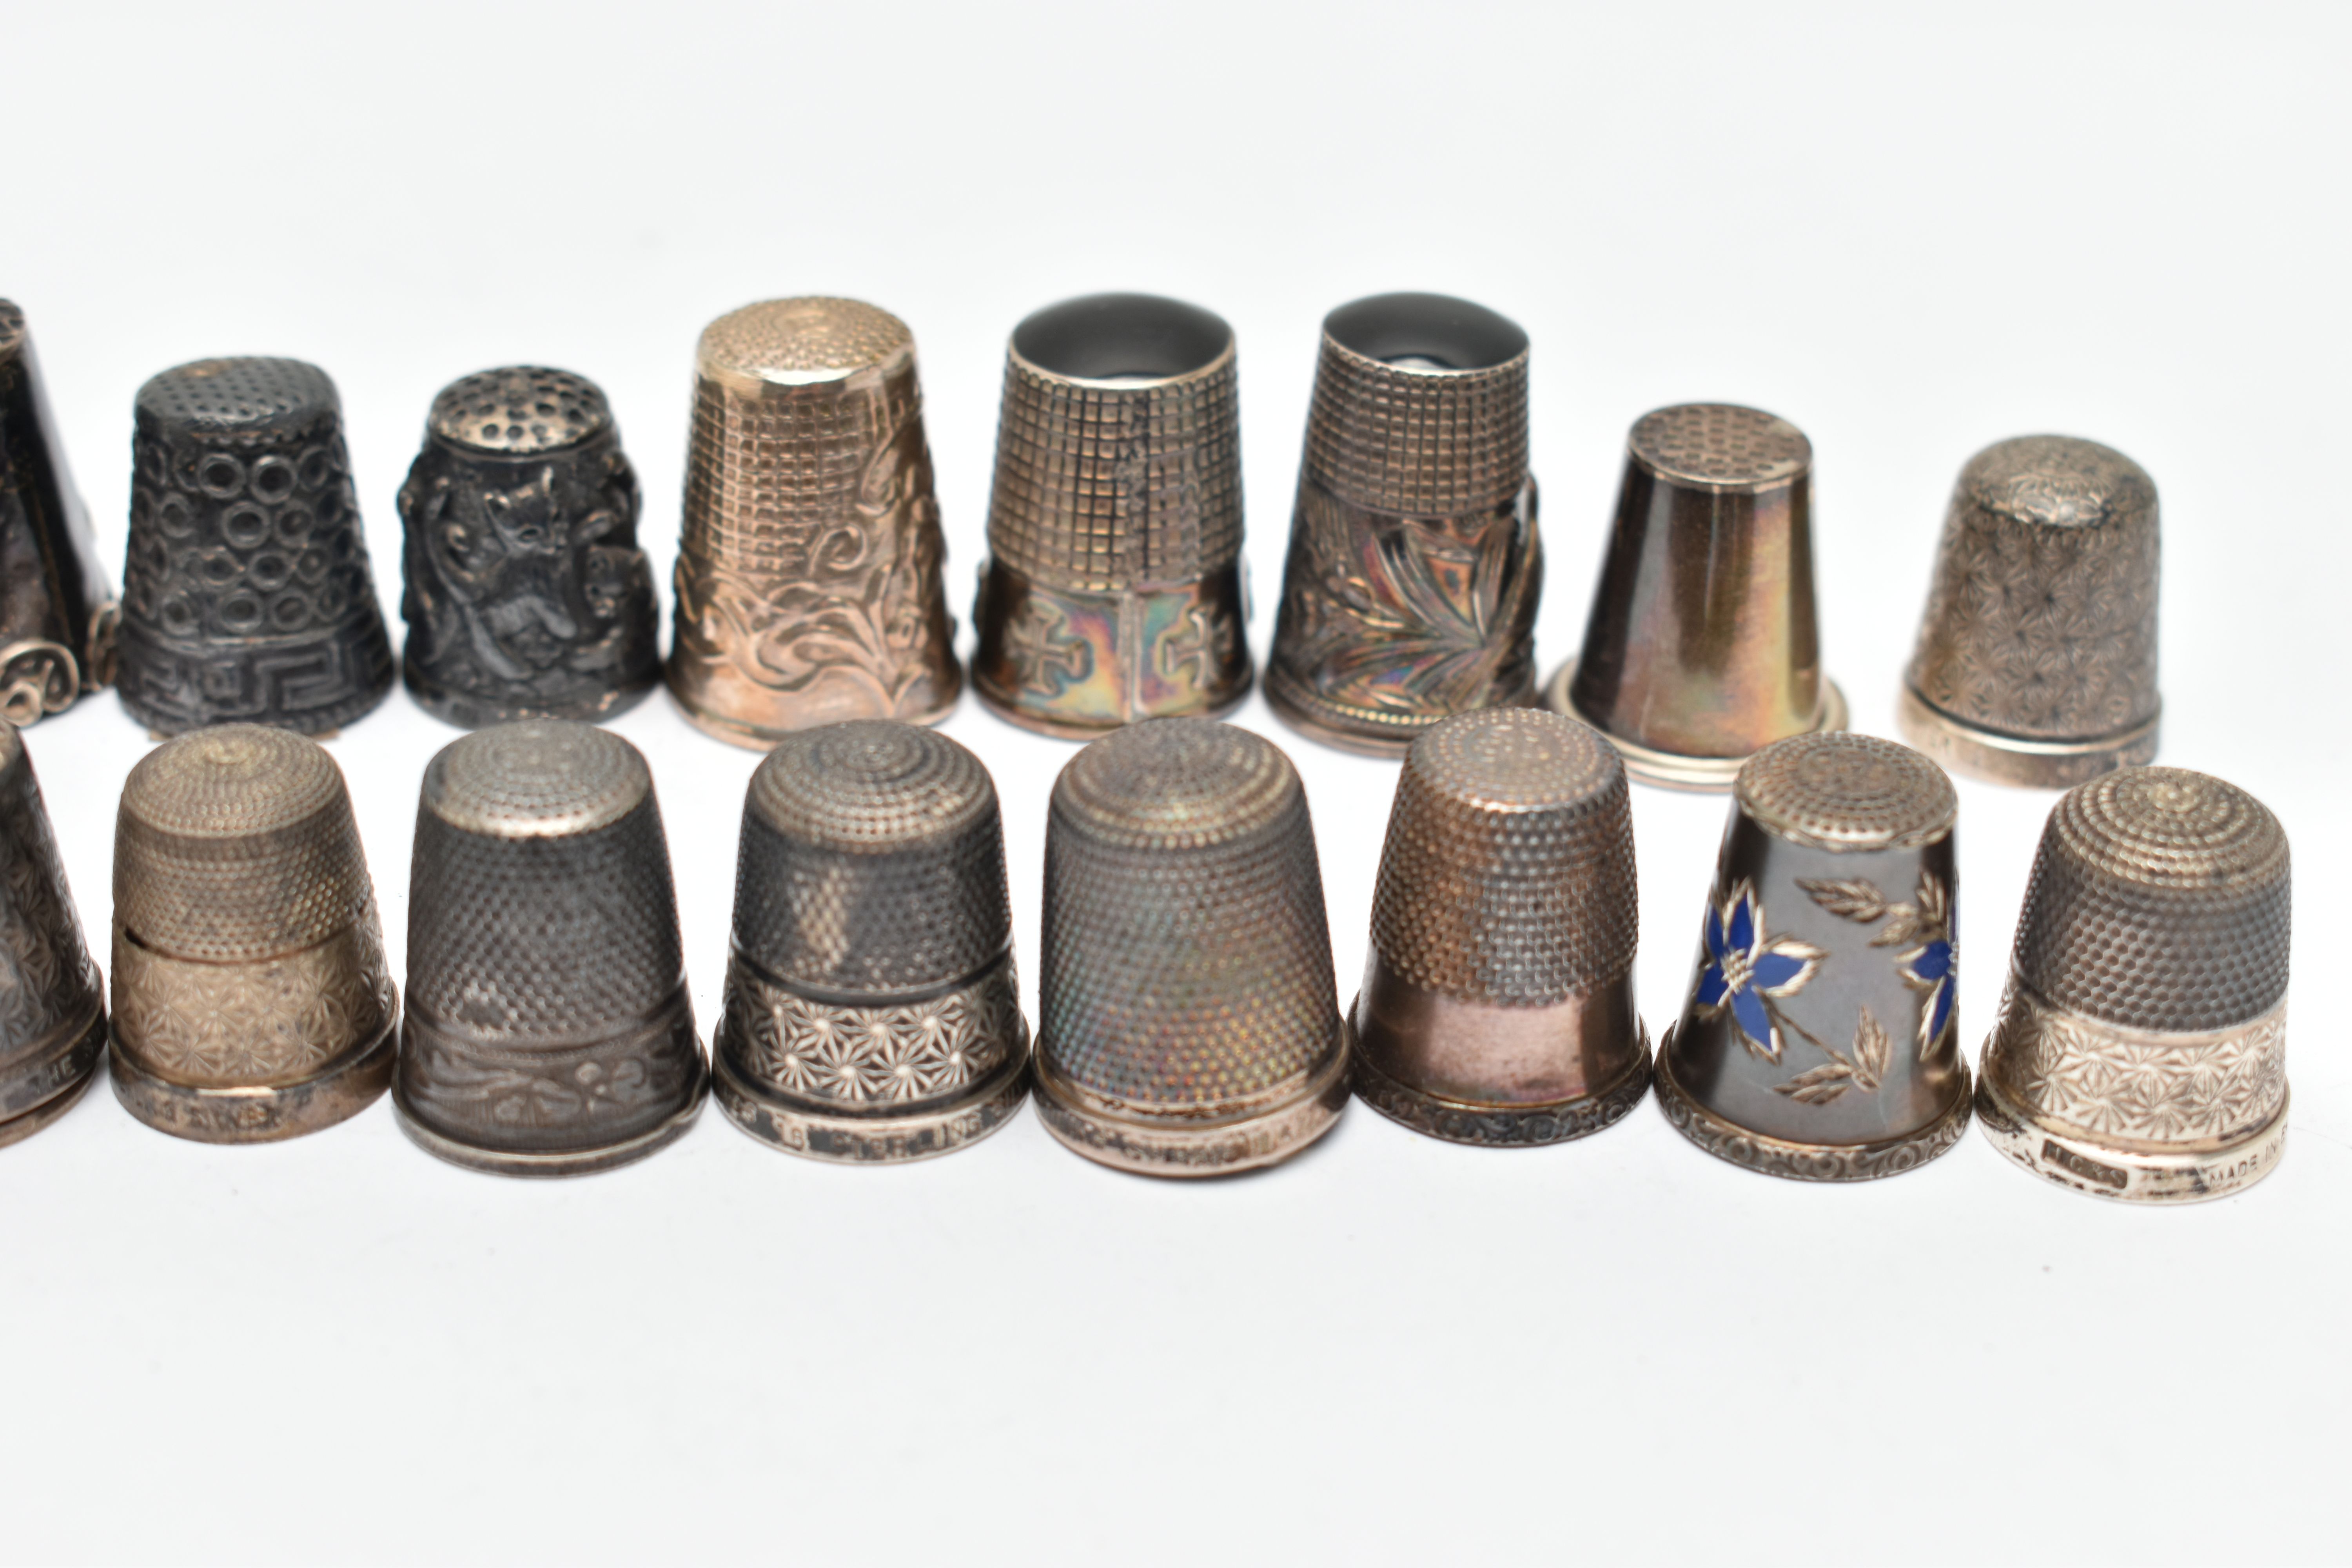 A BAG OF WHITE METAL THIMBLES, various designs and patterns, some set with semi-precious stone - Image 7 of 10